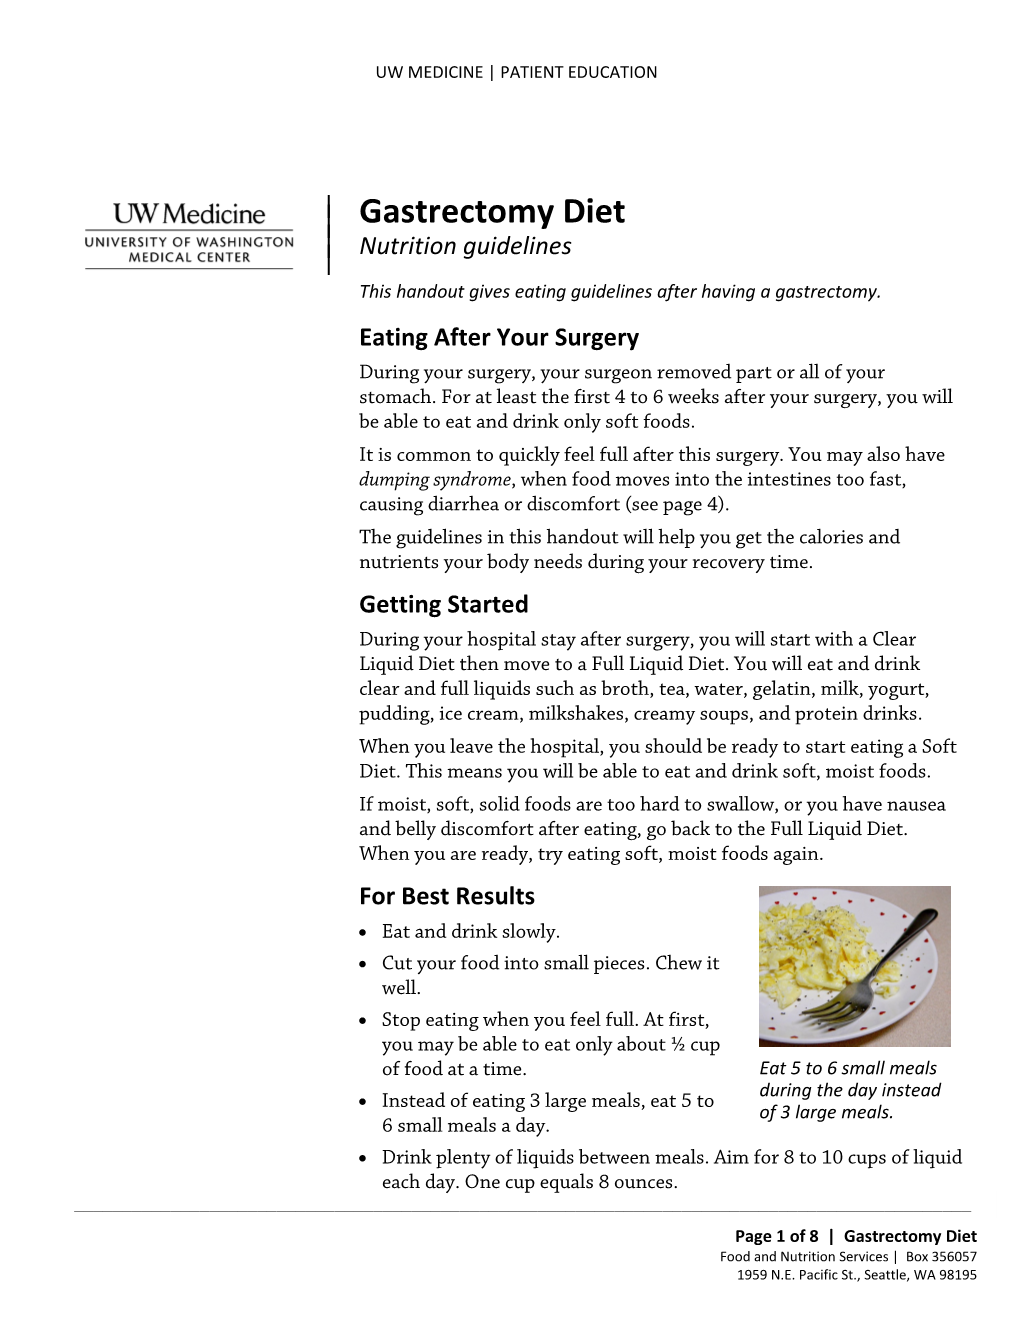 What Is Dumping Syndrome? After a Gastrectomy, Food and Fluids Move Through Your Digestive System More Quickly Than Usual